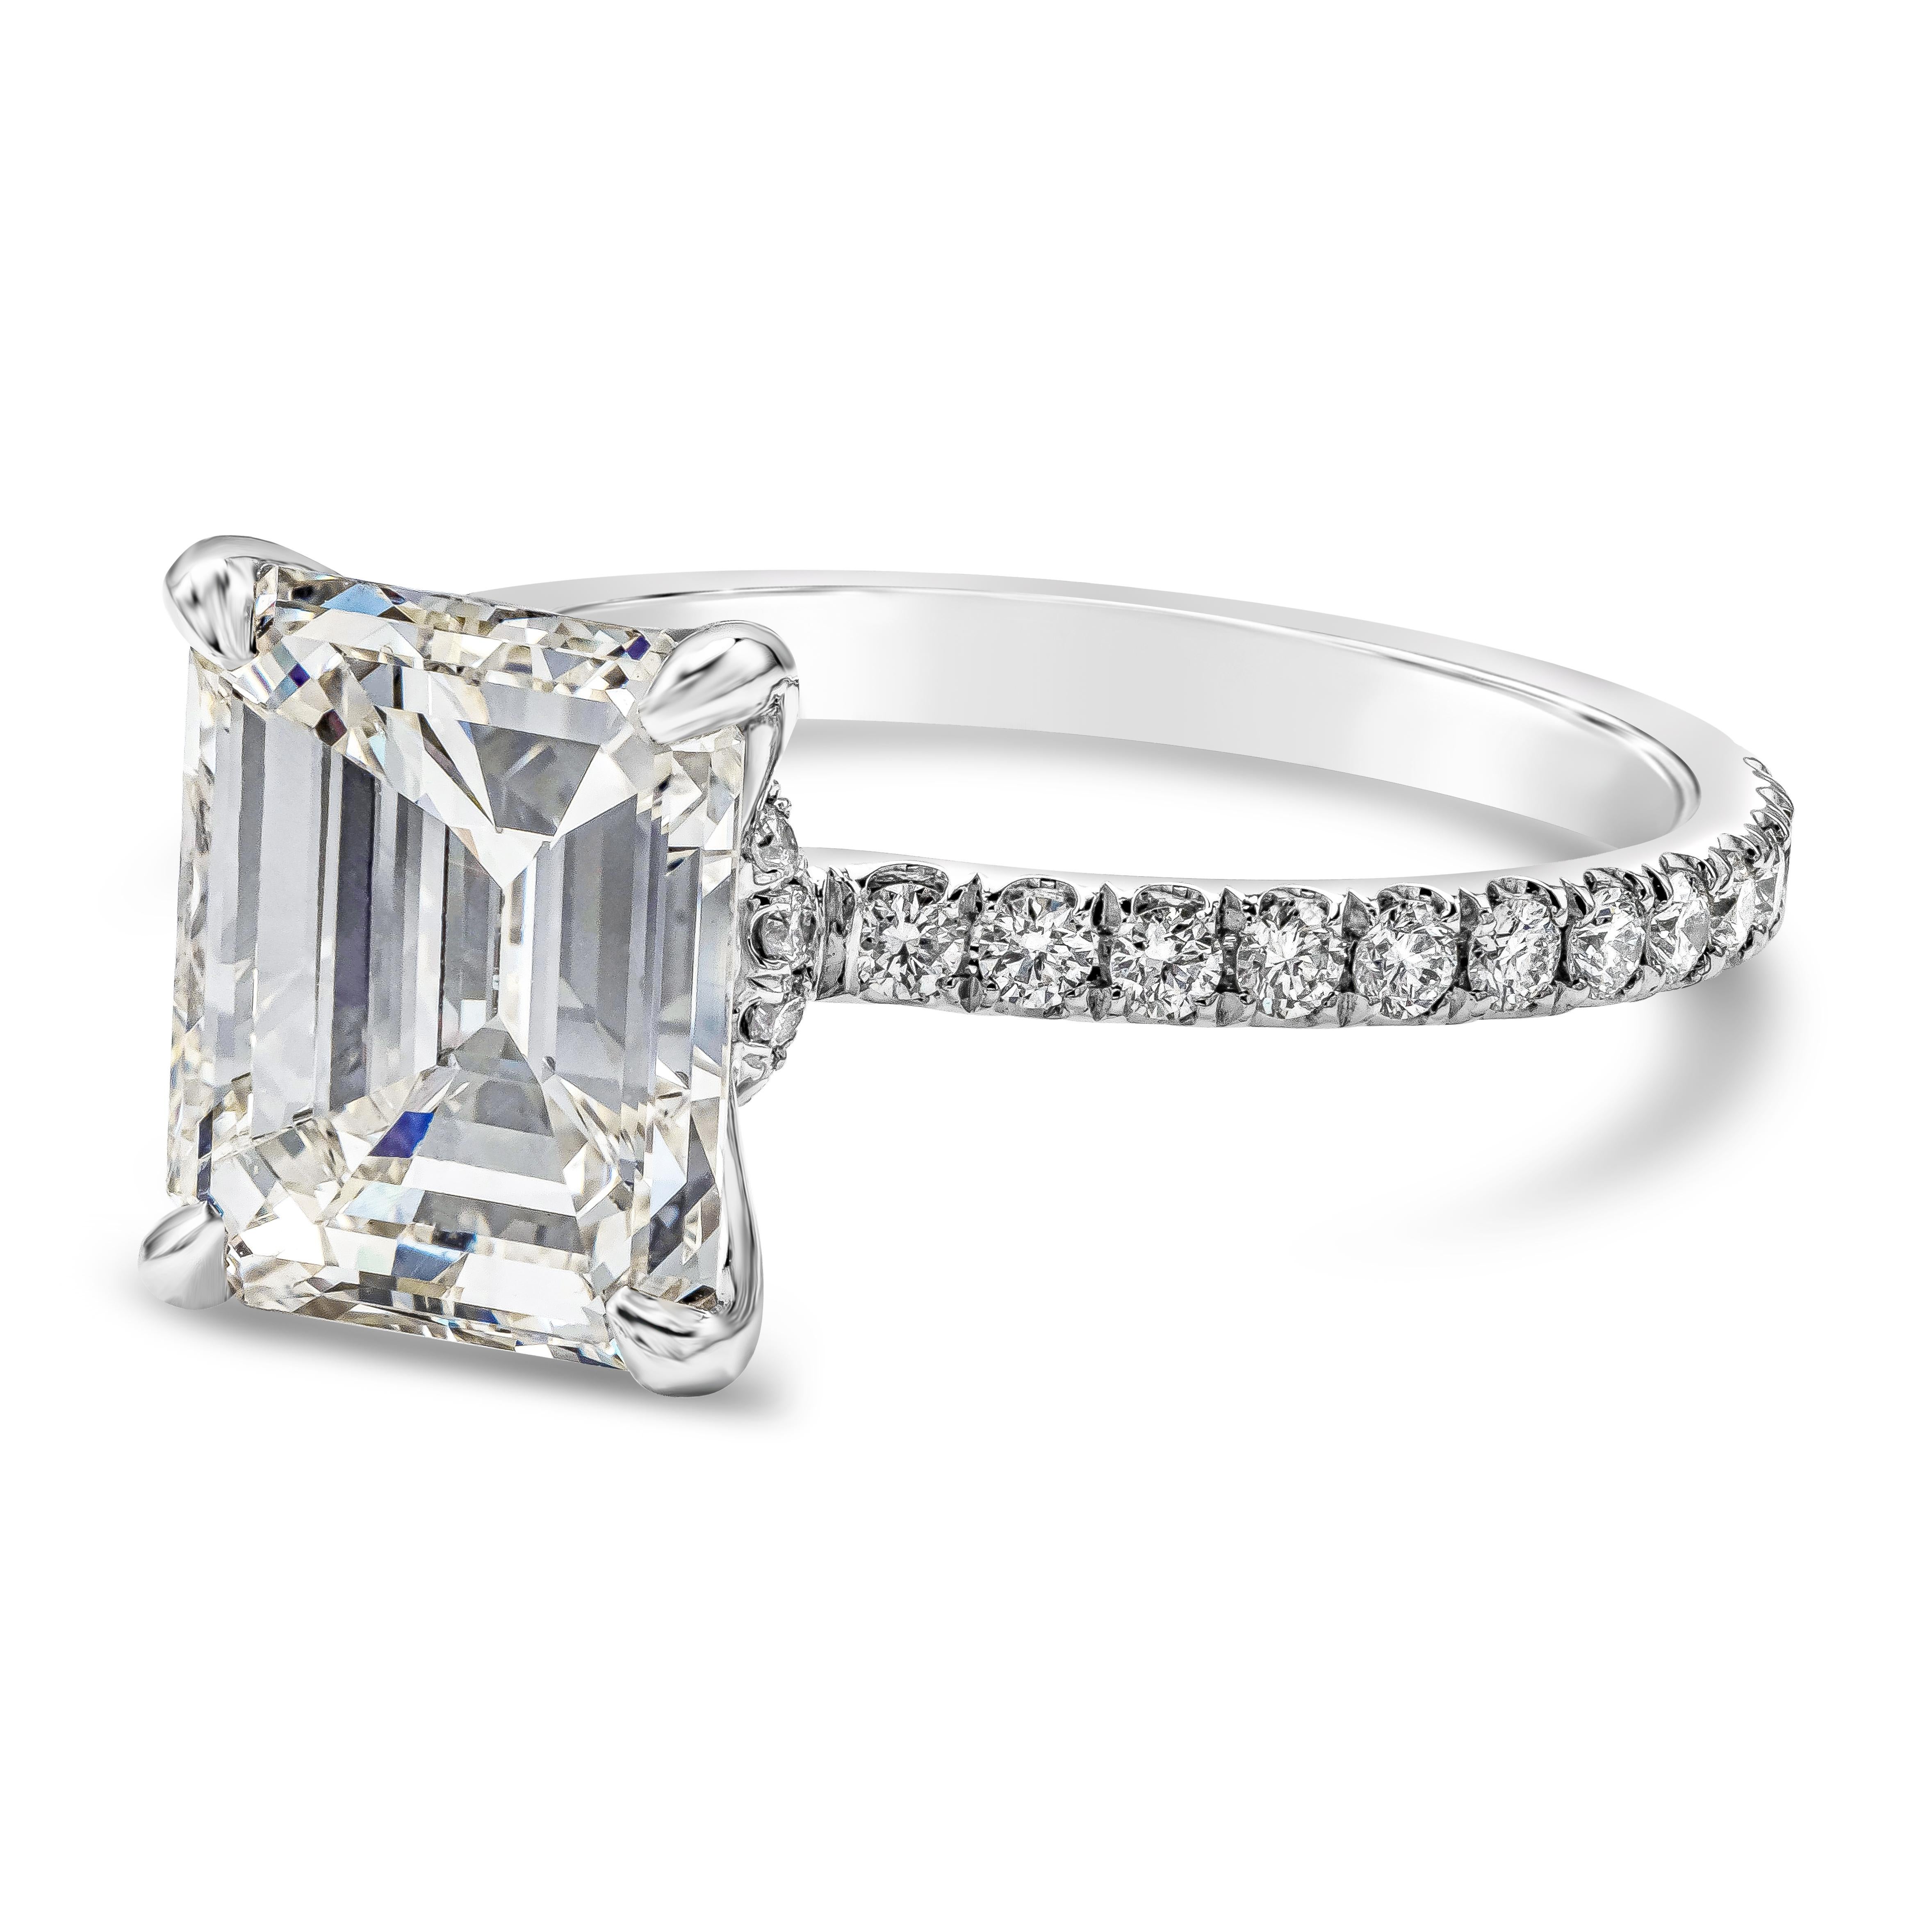 Showcasing a 3.00 carats emerald cut diamond certified by GIA as I color, SI1 in clarity, set in a polished platinum four prong setting and accented with brilliant round diamonds. Accent diamonds weigh 0.40 carats total. Size 6 US resizable upon